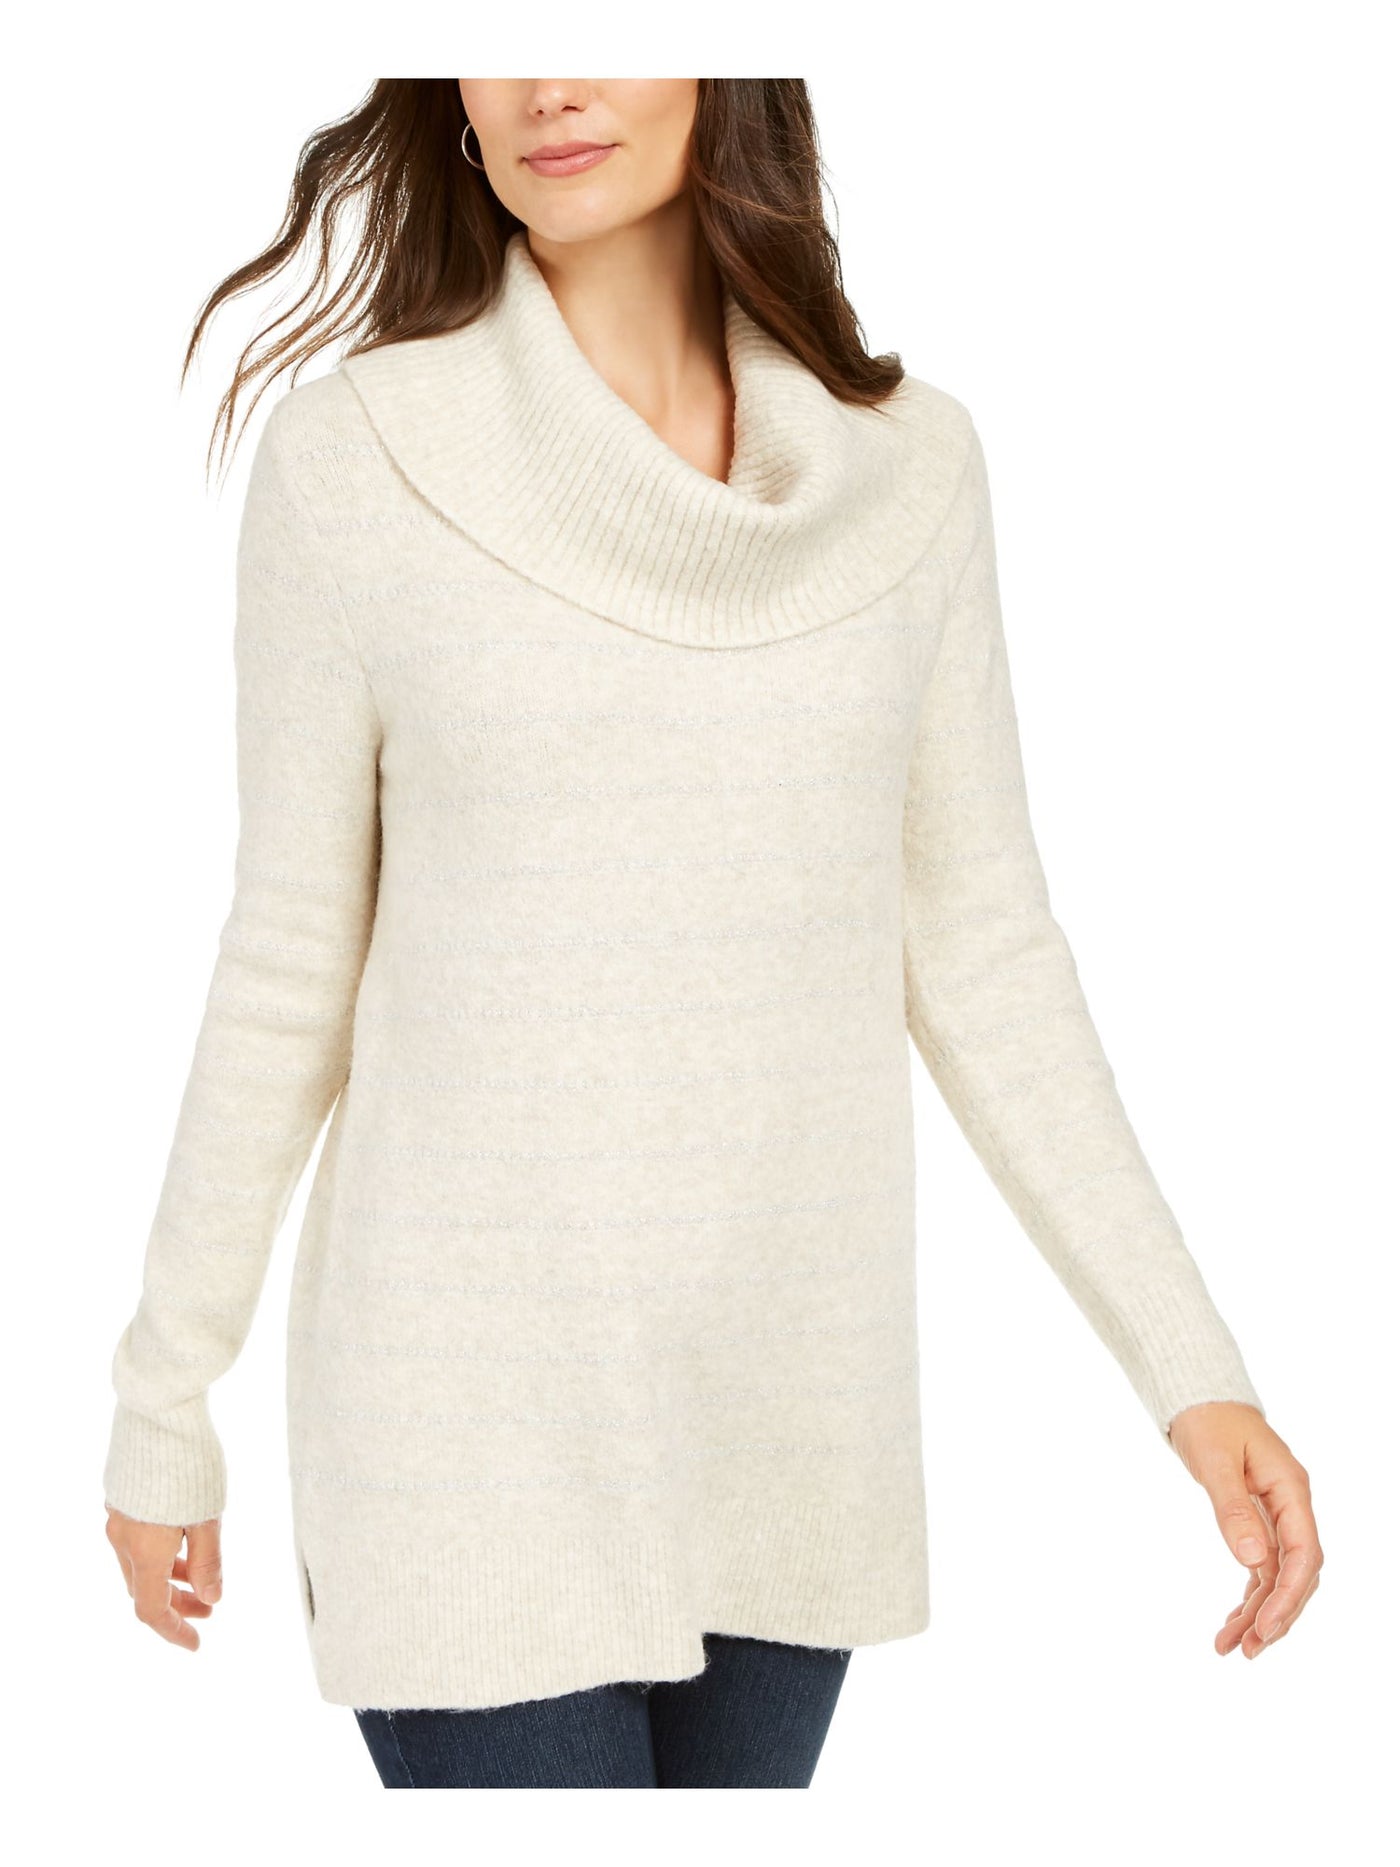 STYLE & COMPANY Womens Embellished Long Sleeve Cowl Neck Sweater